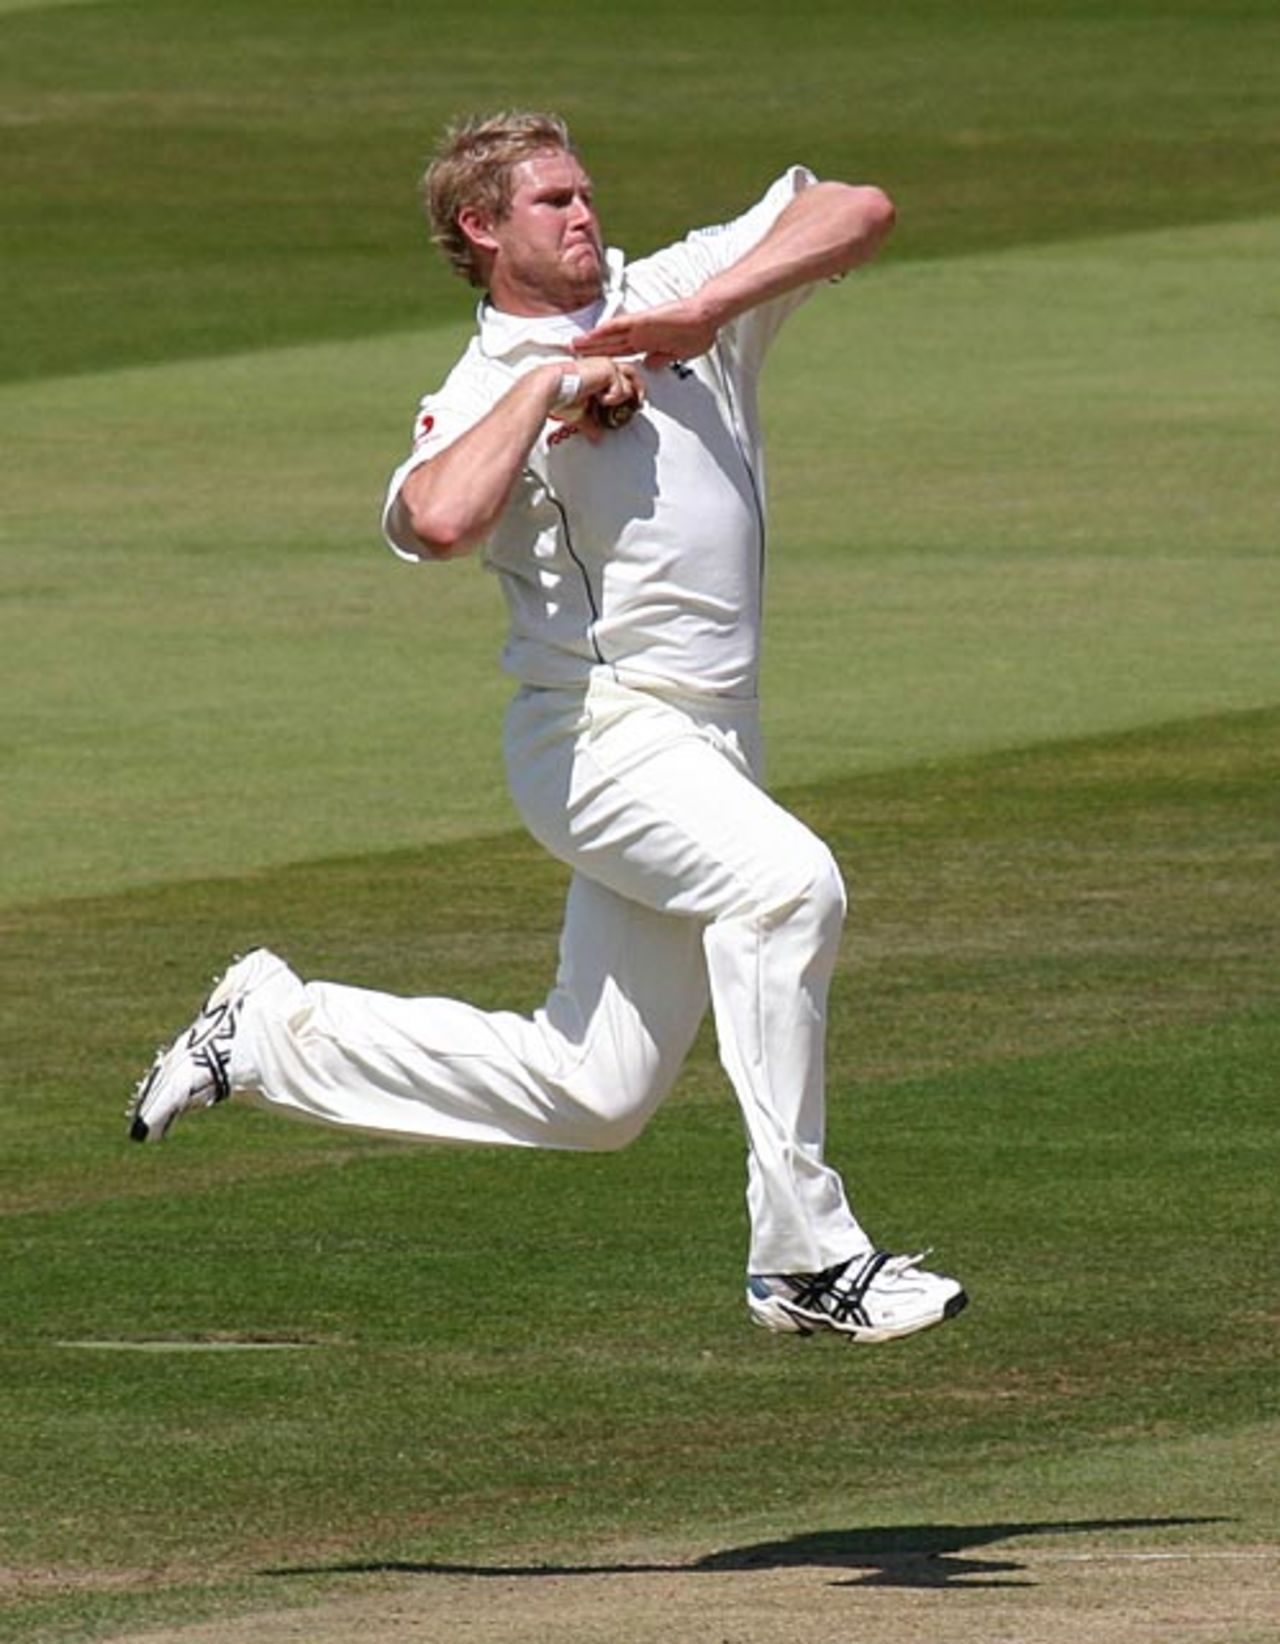 Matthew Hoggard in his delivery stride, England v Pakistan, 1st Test, Lord's, July 17, 2006